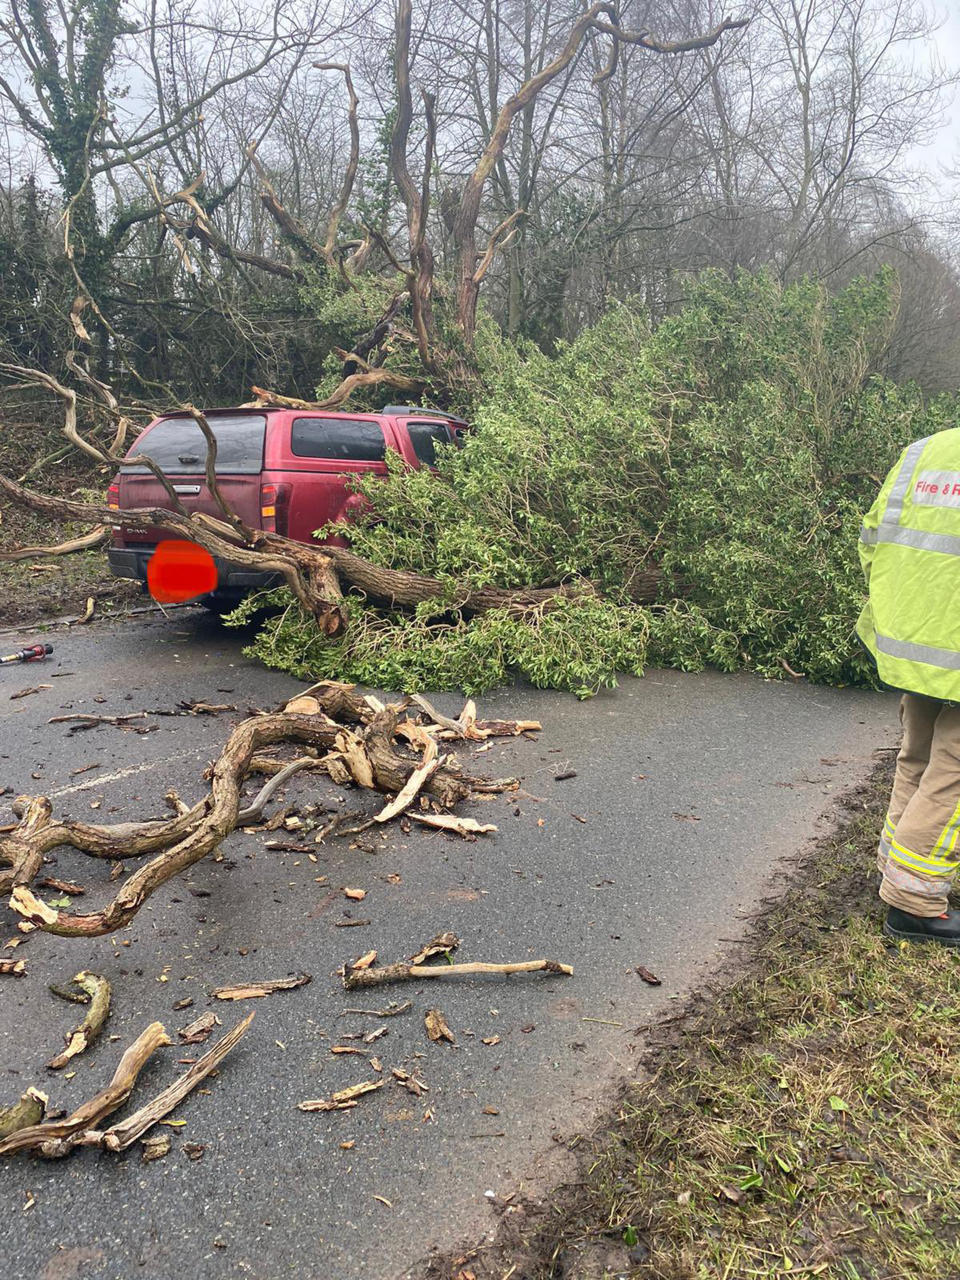 A vehicle trapped under a fallen tree in Brewood. Two people were treated for minor injuries. (PA)